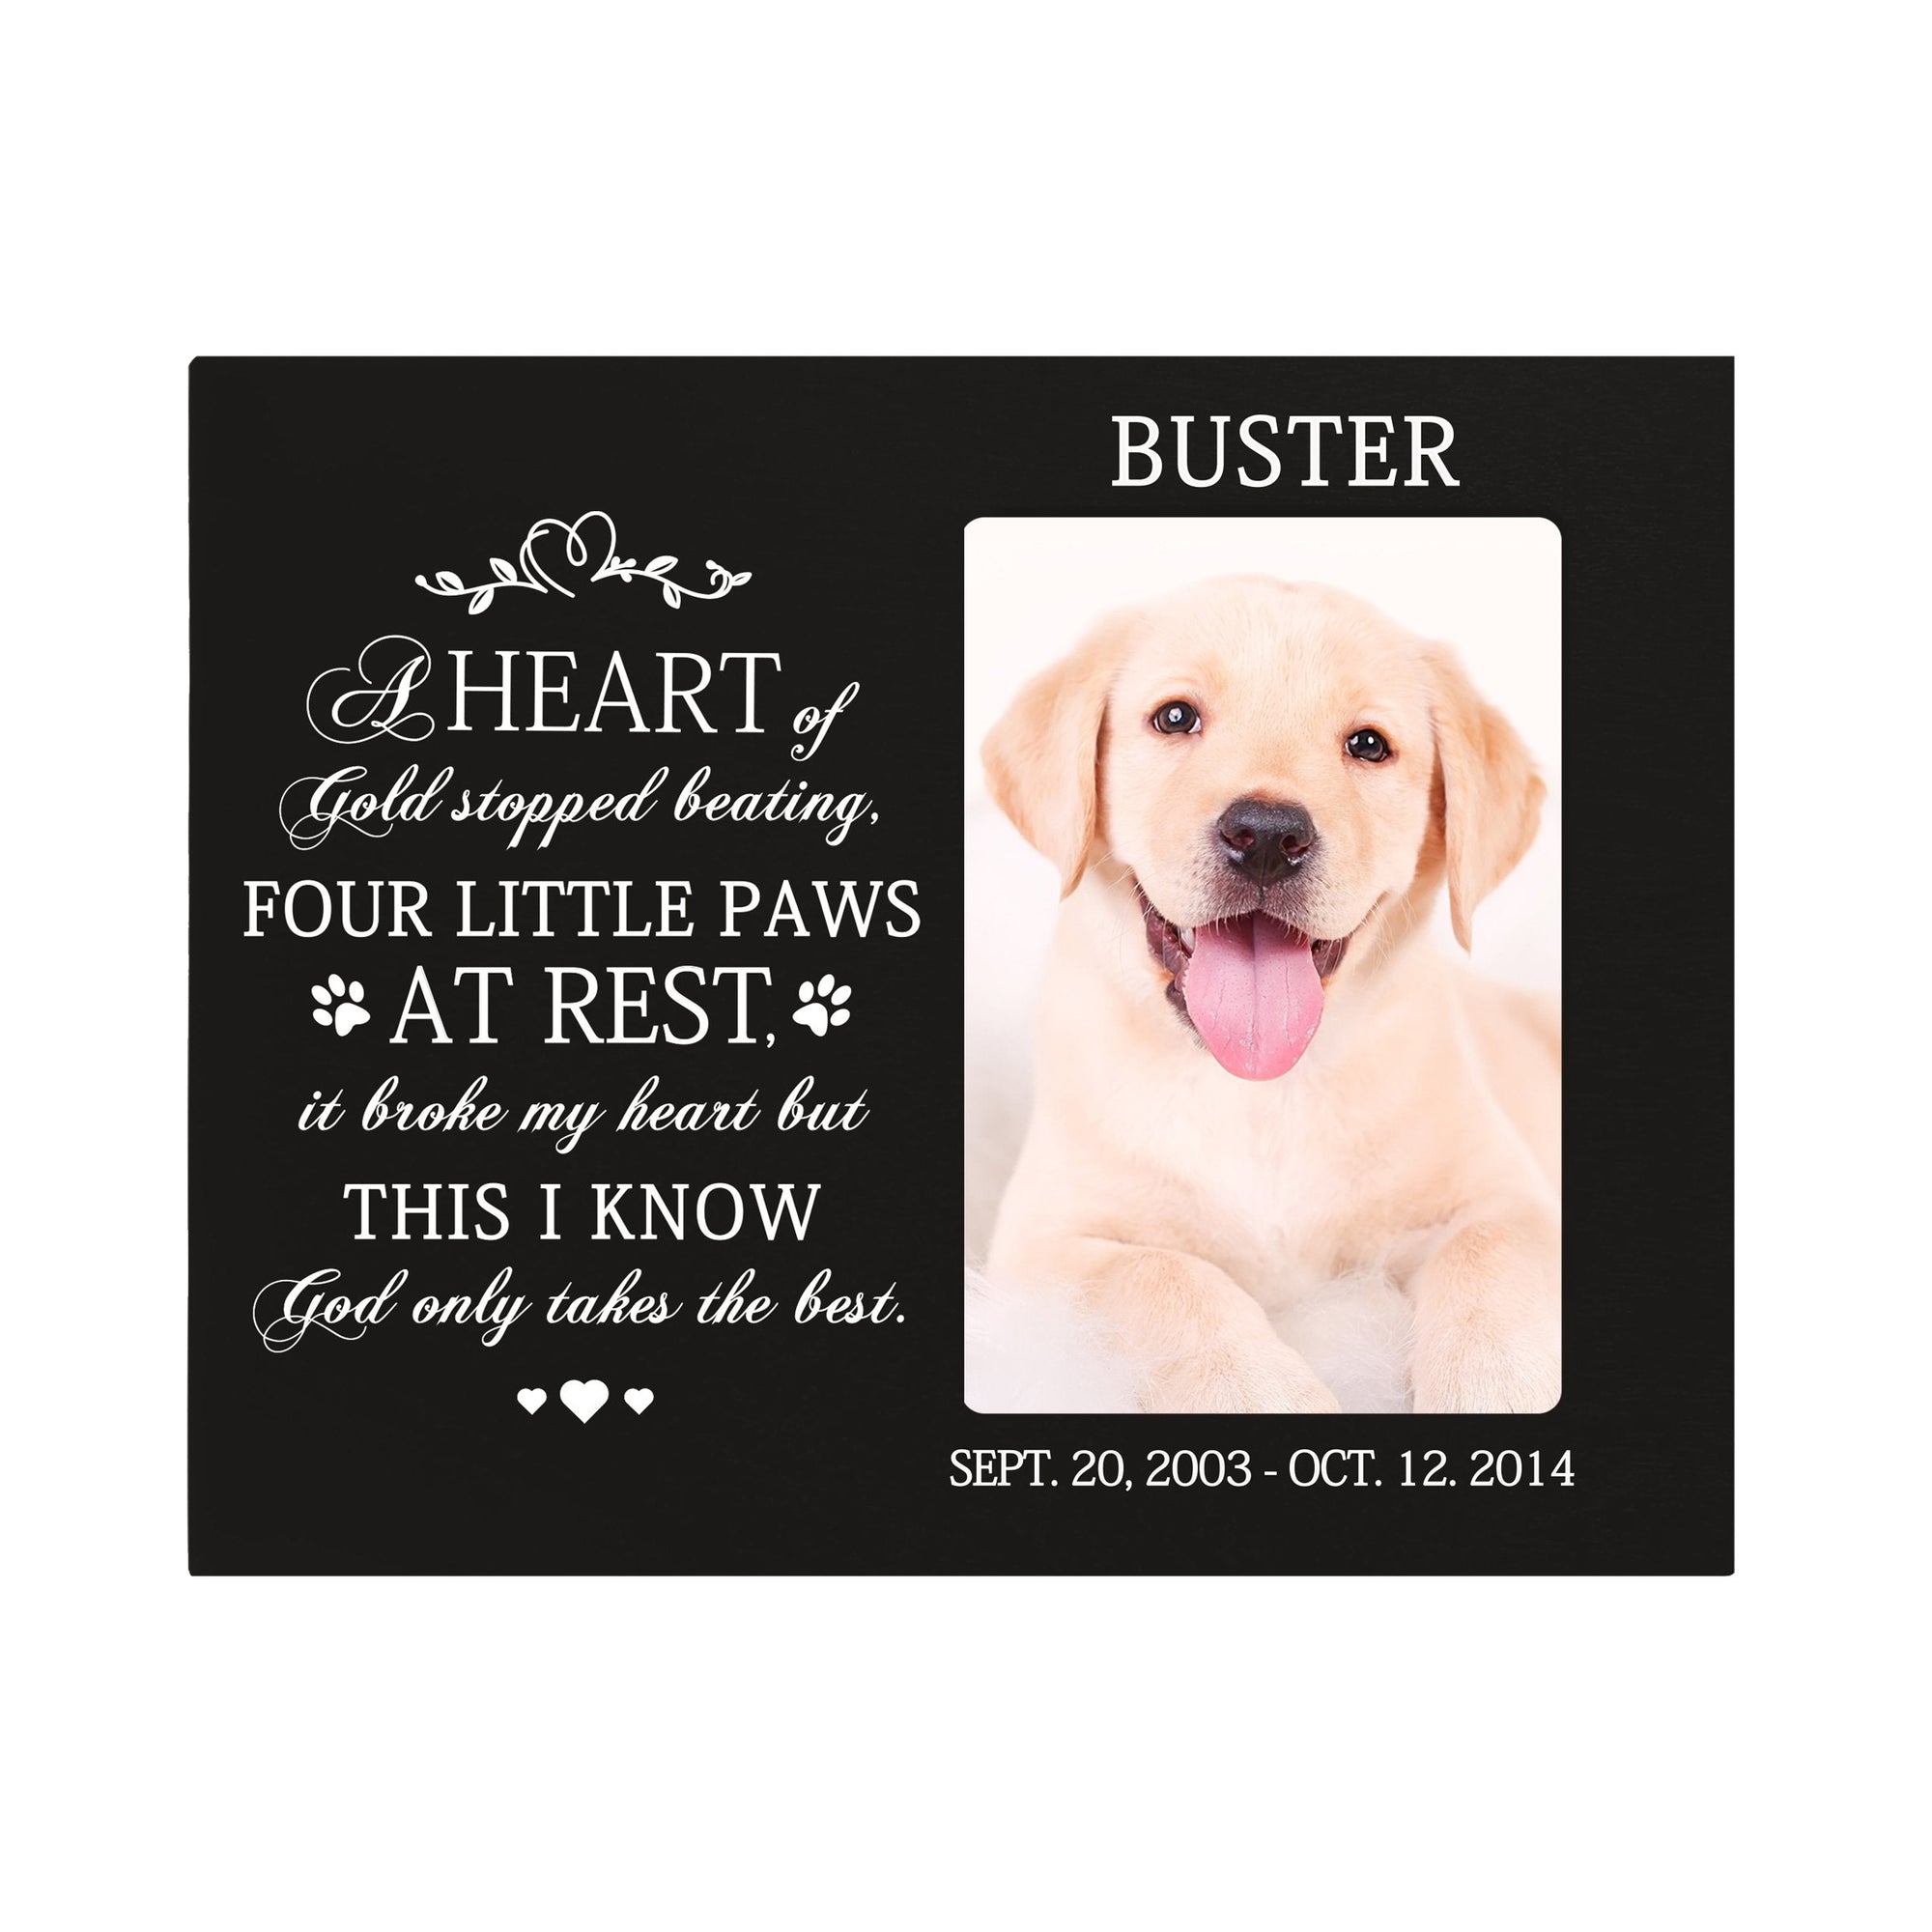 8x10 Black Pet Memorial Picture Frame with the phrase "A Heart of Gold"